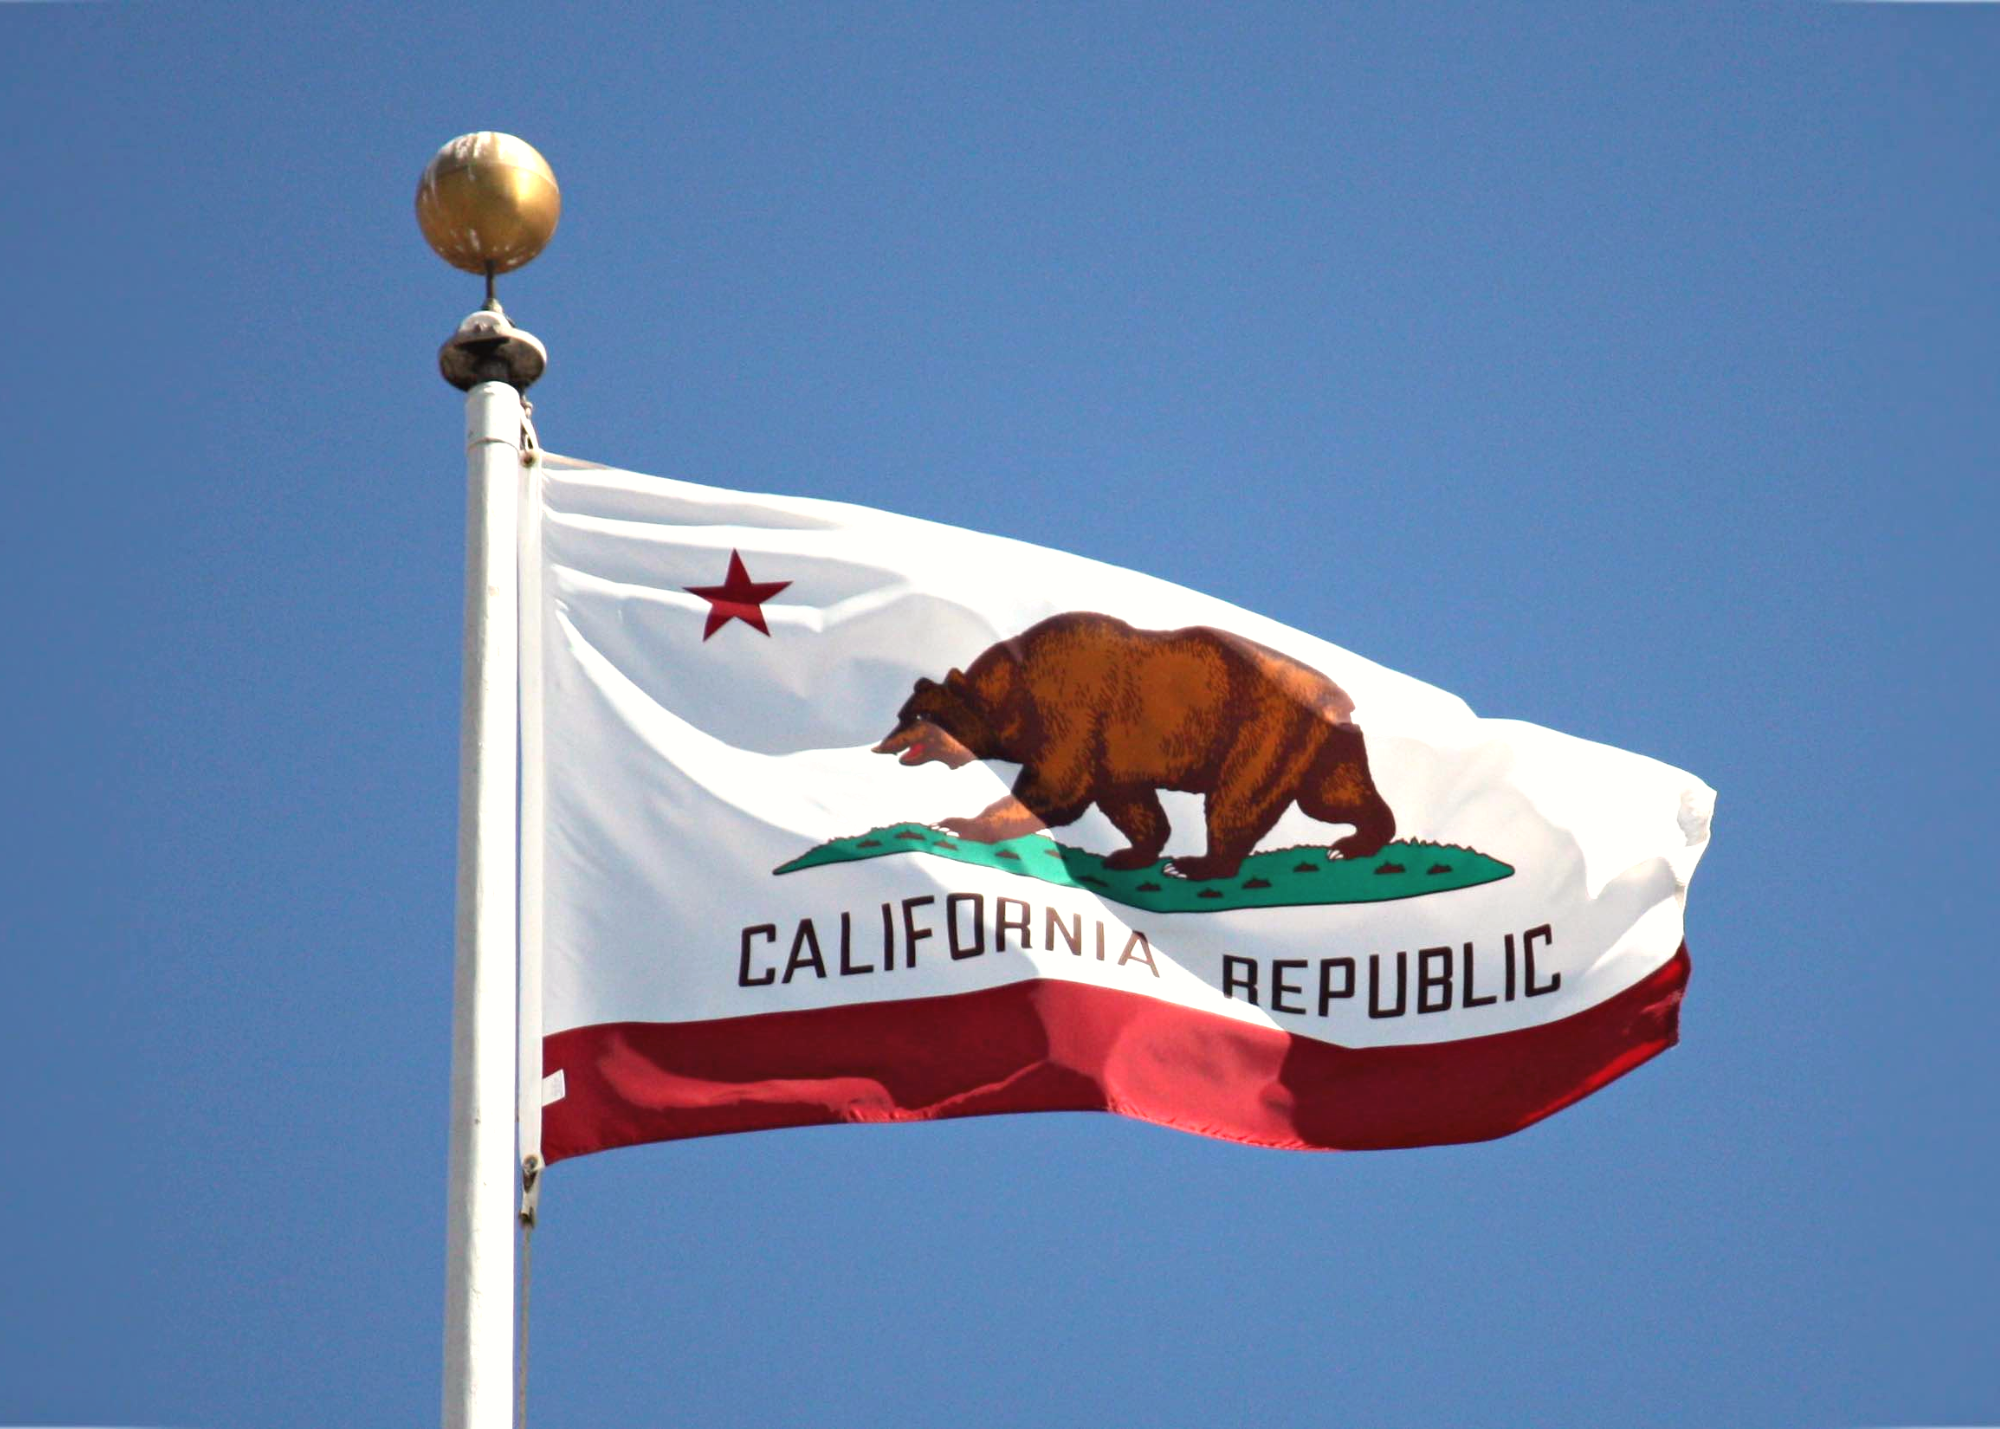 The state flag of Californian Republic has a red star in the upper left corner and a Californian Grizzly Bear depicted in the center